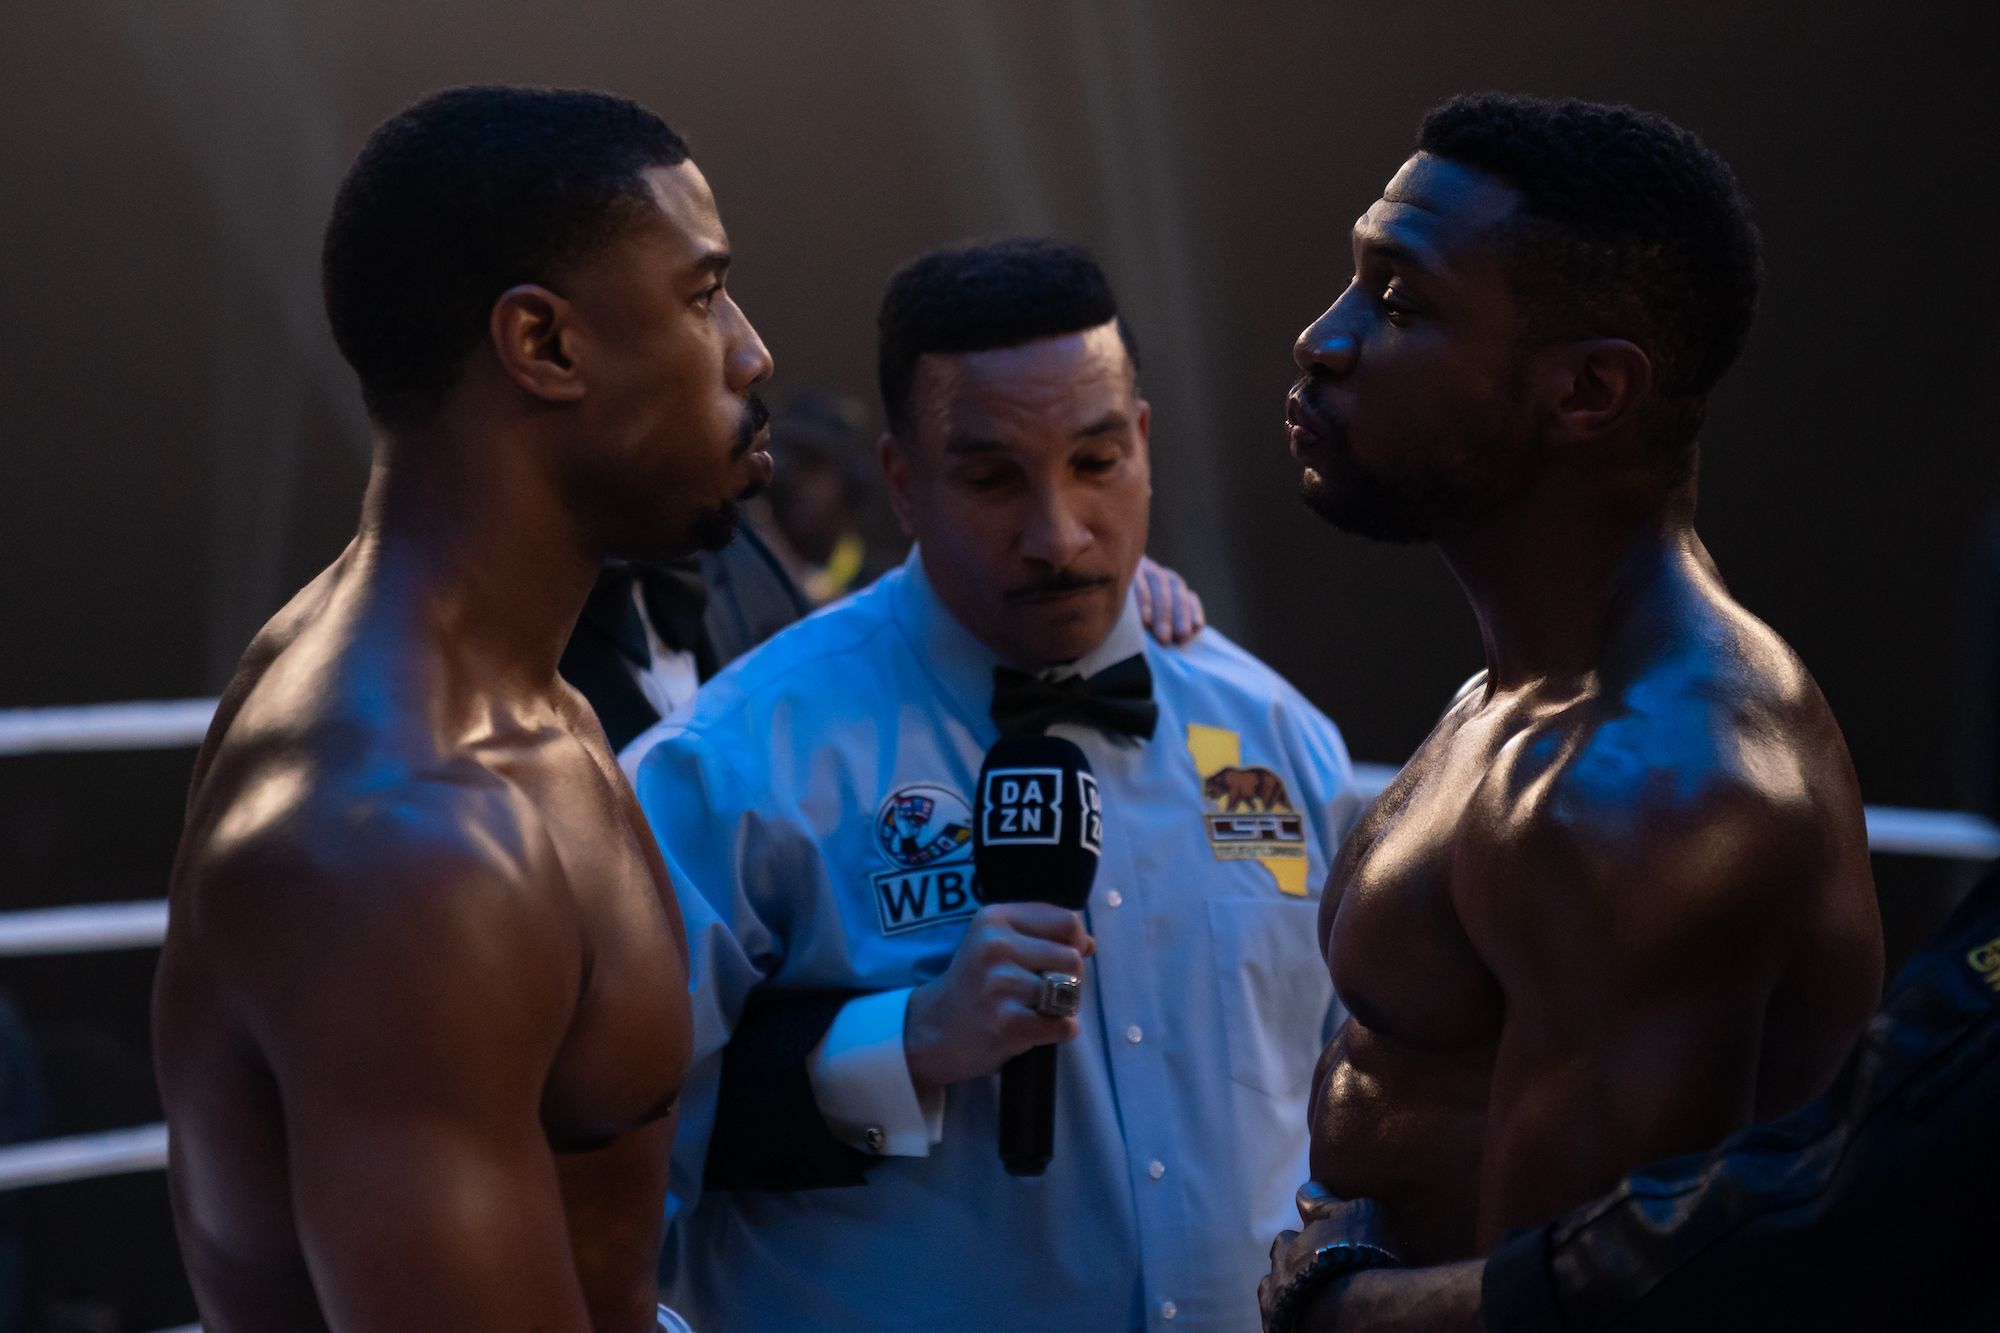 Adonis and Dame face off in Creed III